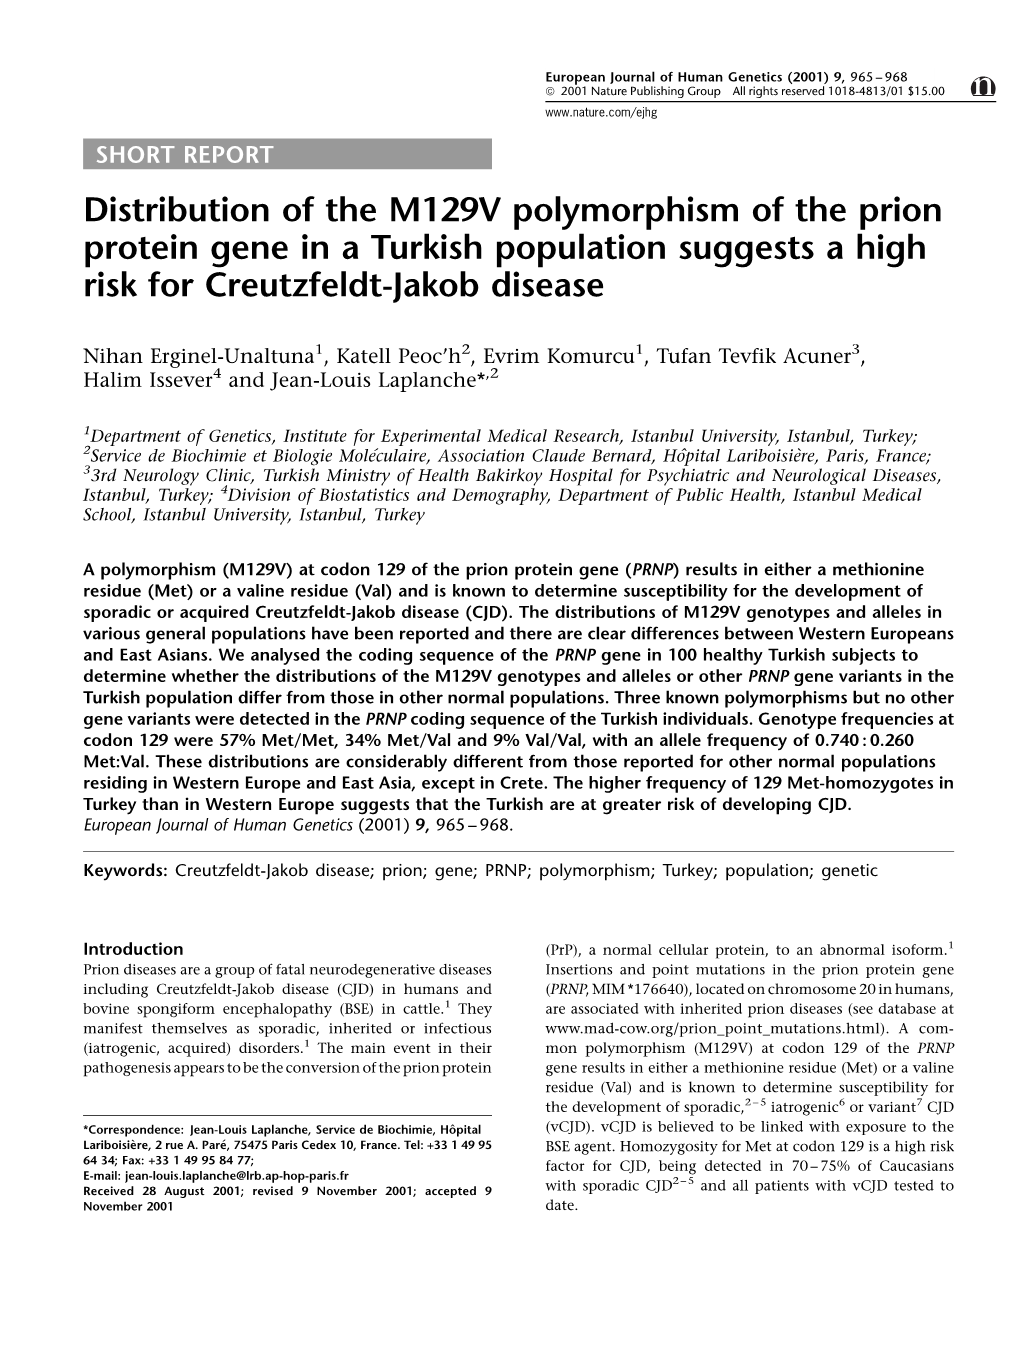 Distribution of the M129V Polymorphism of the Prion Proteingeneinaturkishpopulationsuggestsahigh Risk for Creutzfeldt-Jakob Disease